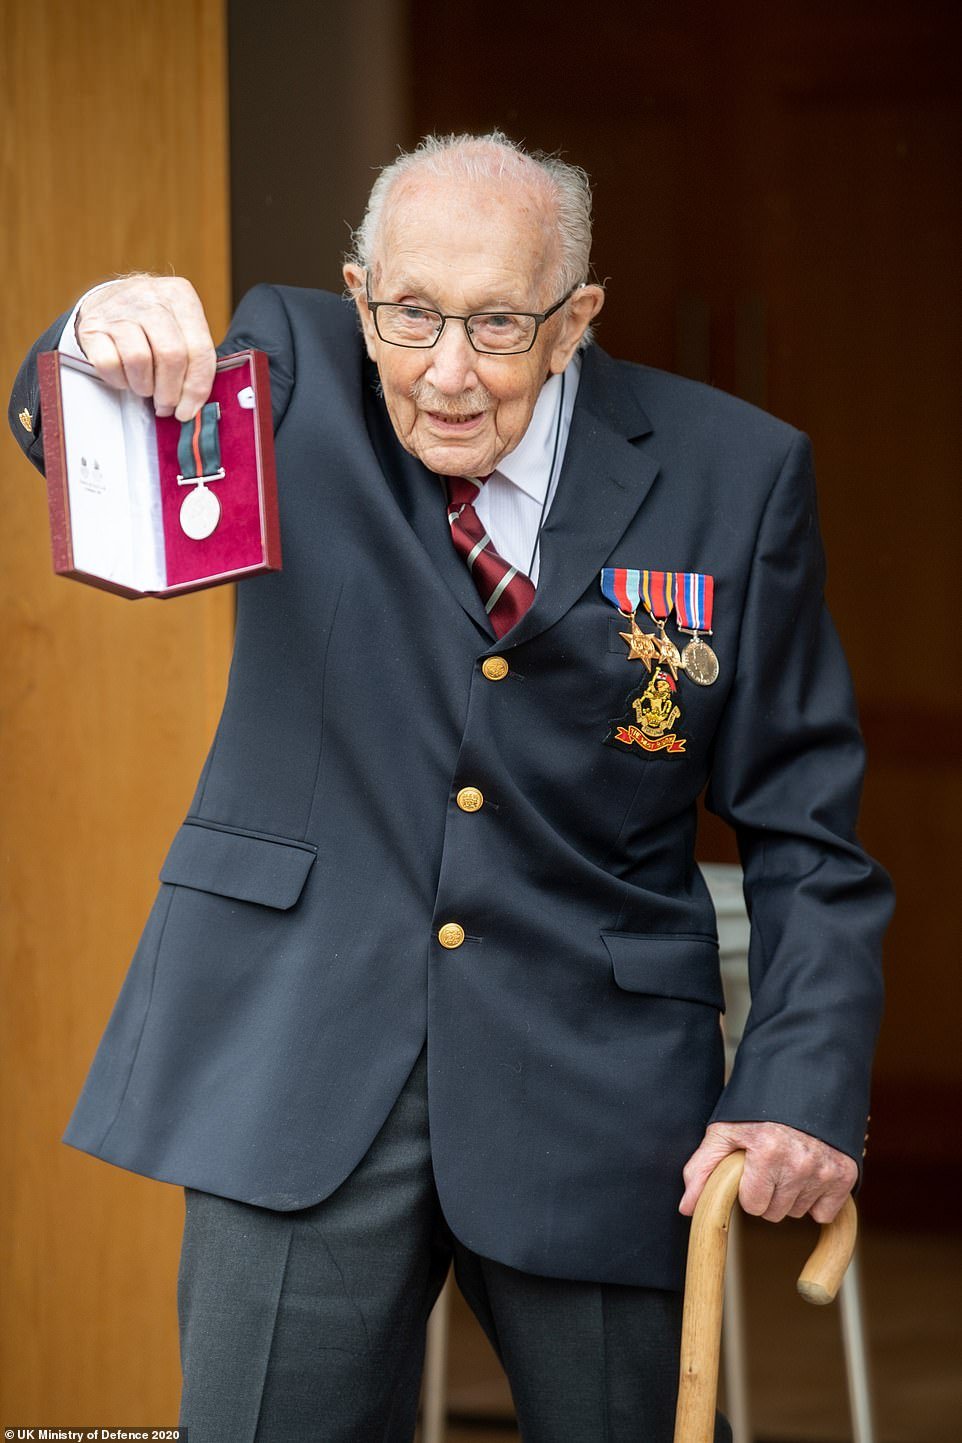 Captain Tom Moore, a former British Army Officer, has been promoted to the rank of Colonel on his 100th Birthday by the Queen after he raised £29 million for the NHS amid the coronavirus pandemic